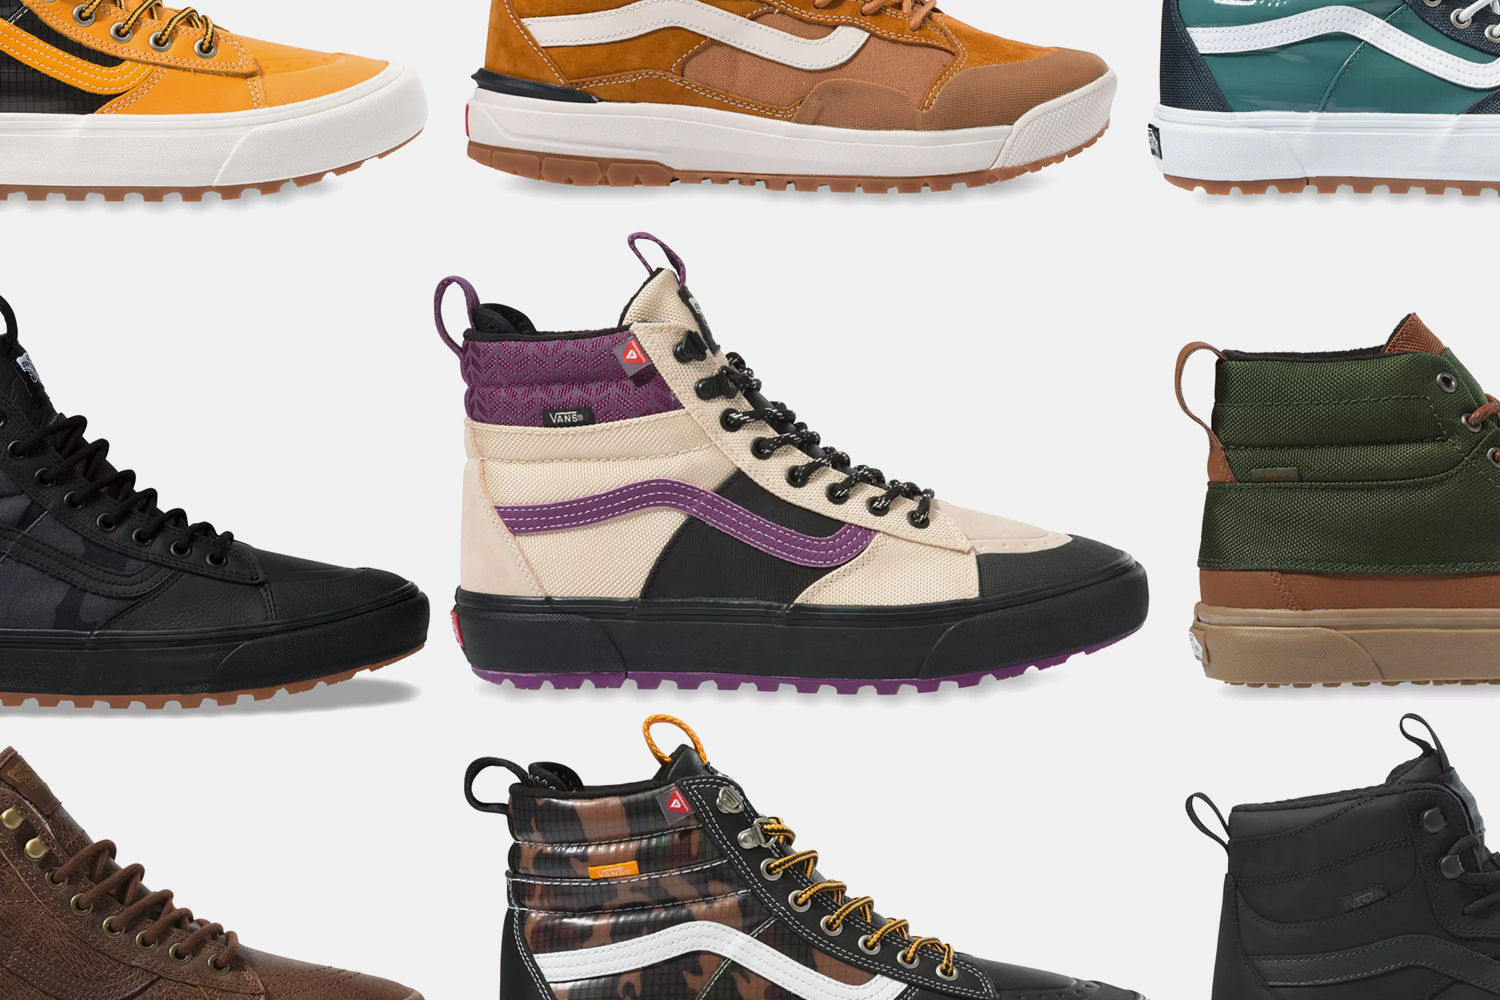 Vans Now Makes Some of the Best Sneaker Boots Around - InsideHook